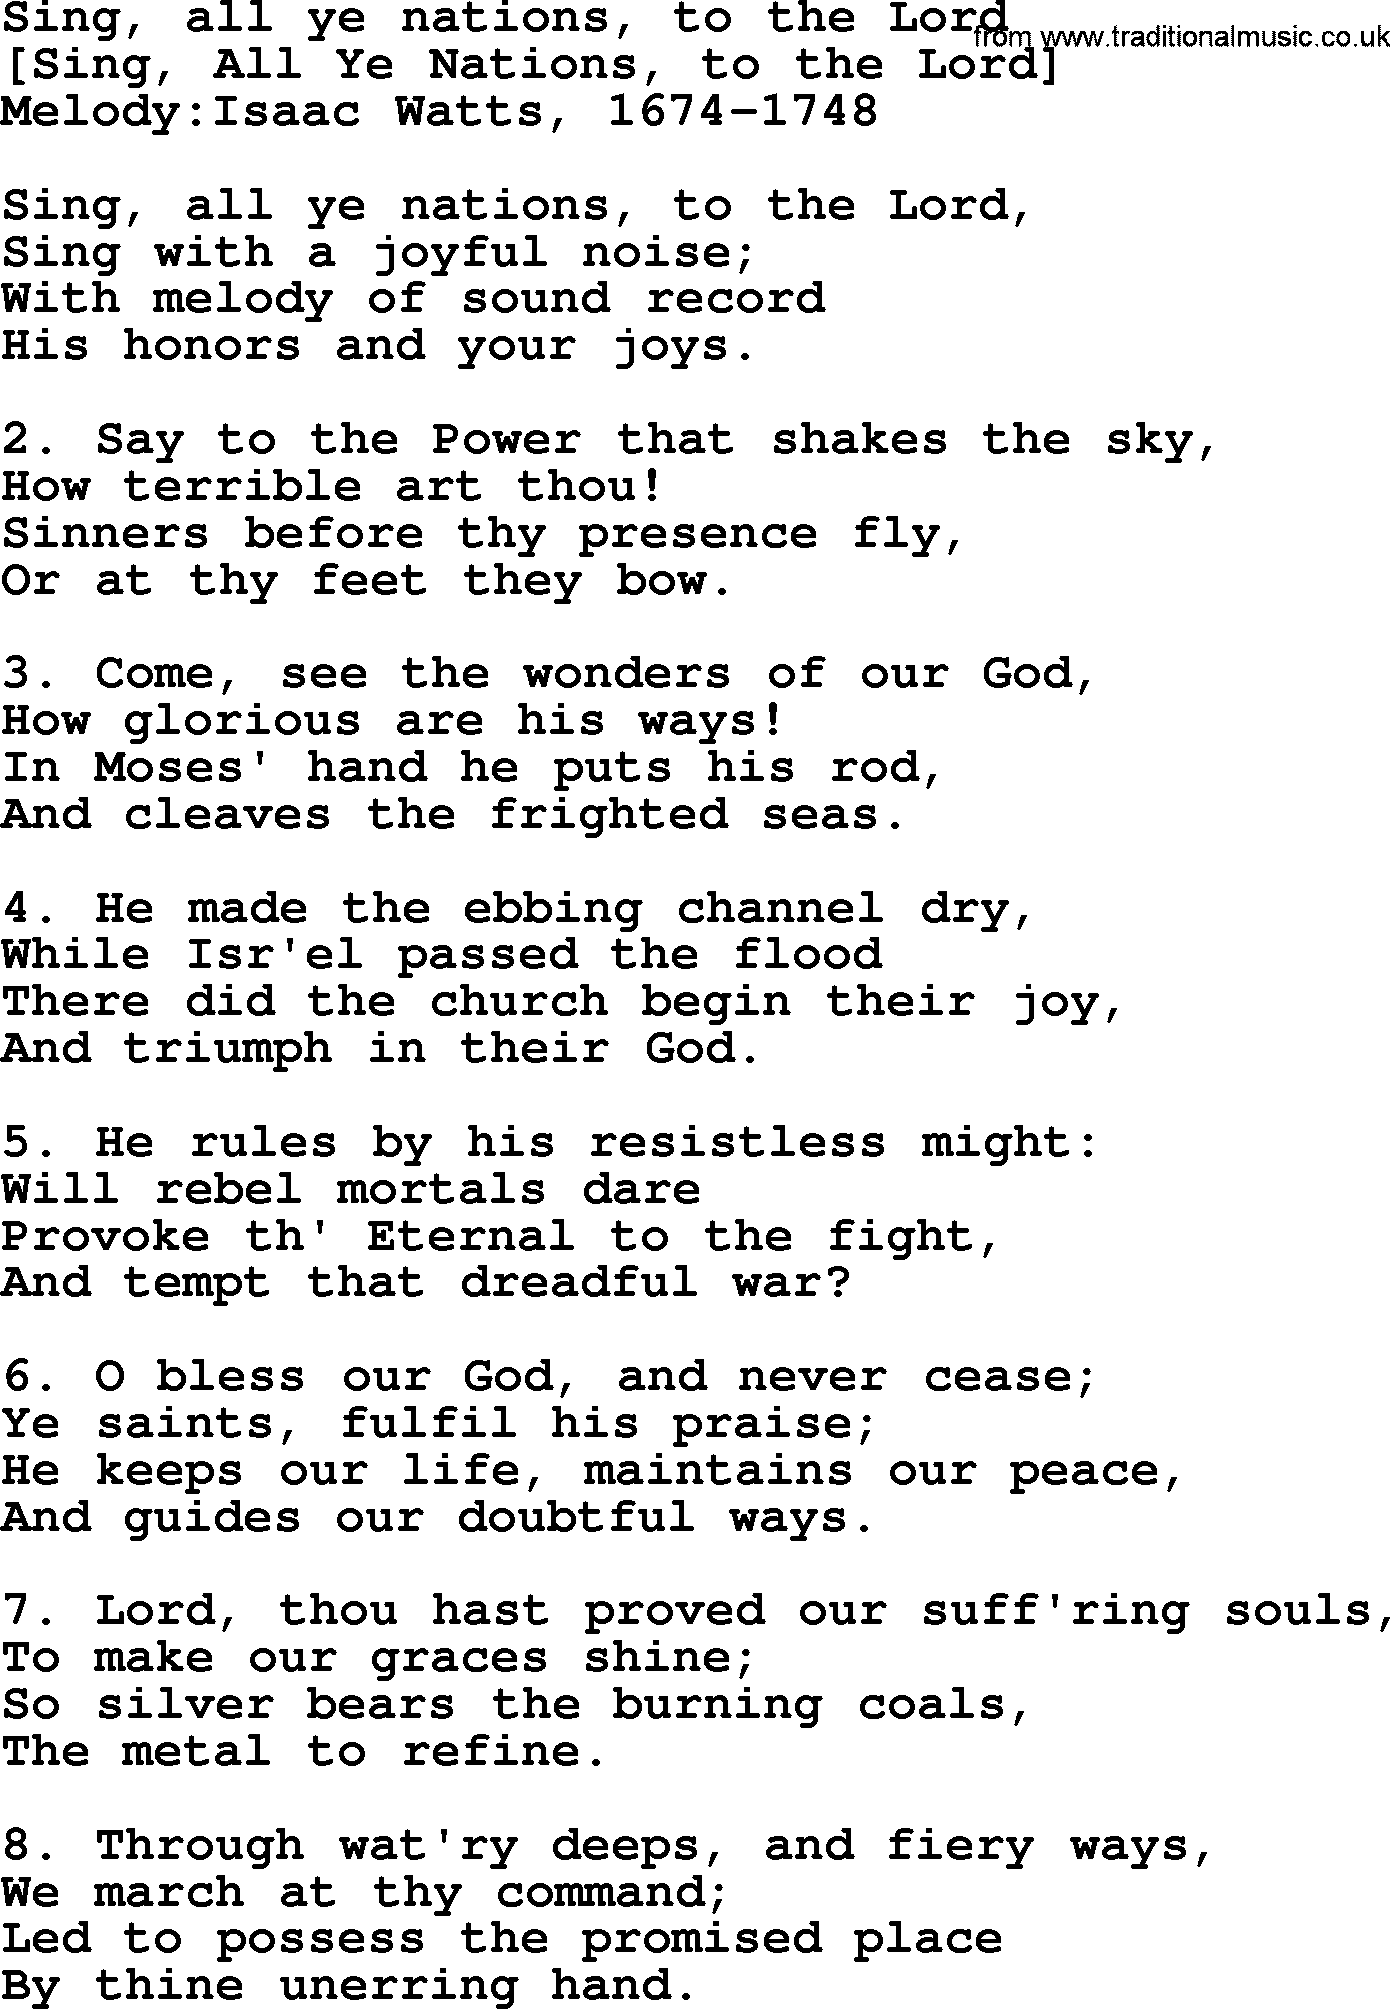 Old English Song: Sing, All Ye Nations, To The Lord lyrics